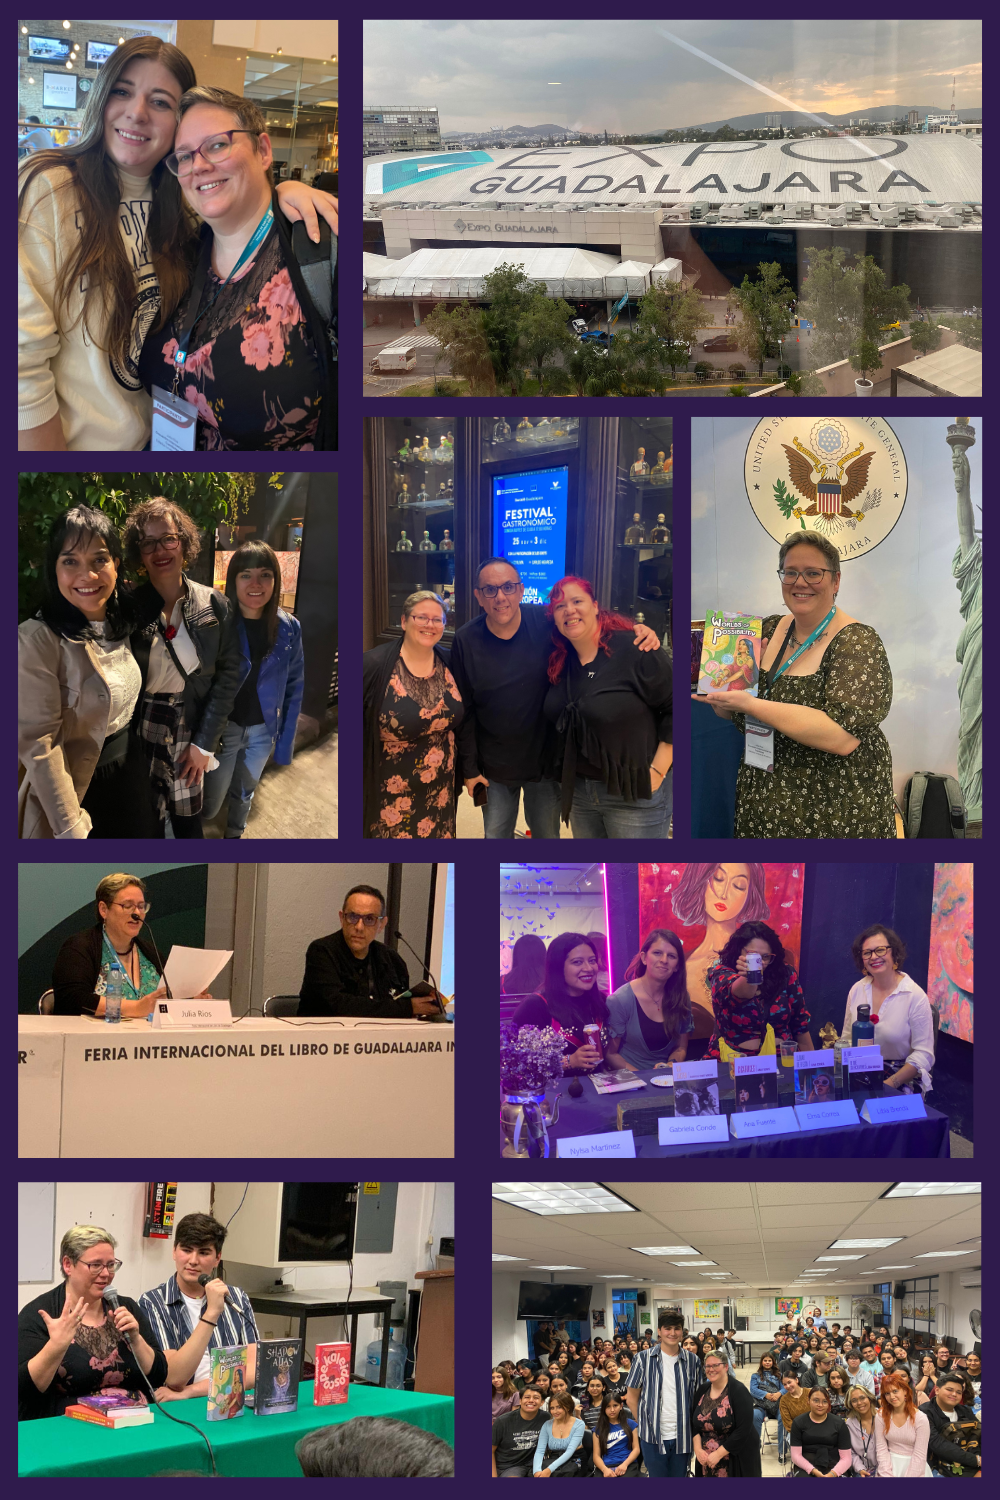 Top Left: Me with Mariana Palova. Top Right: The view of the expo center from my hotel room. Second row left: Gabriela Damián Miravete, Libia Brenda, and Daniela L. Guzmán. Second row middle: Me with Alberto Chimal and Raquel Castro. Second row right: Me holding Worlds of Possibility at the US consulate booth on the FIL expo floor. Third row left: Me reading my story at the international storytellers encounter panel hosted by Alberto Chimal. Third row right: Gabriala Conde, Ana Fuentes, Elma Correa, and Libia Brenda at their book launch. Fourth row left: Me presenting at a high school in Tonalá with a student translating for me. Fourth row right: Me and my student translator with the audience. 